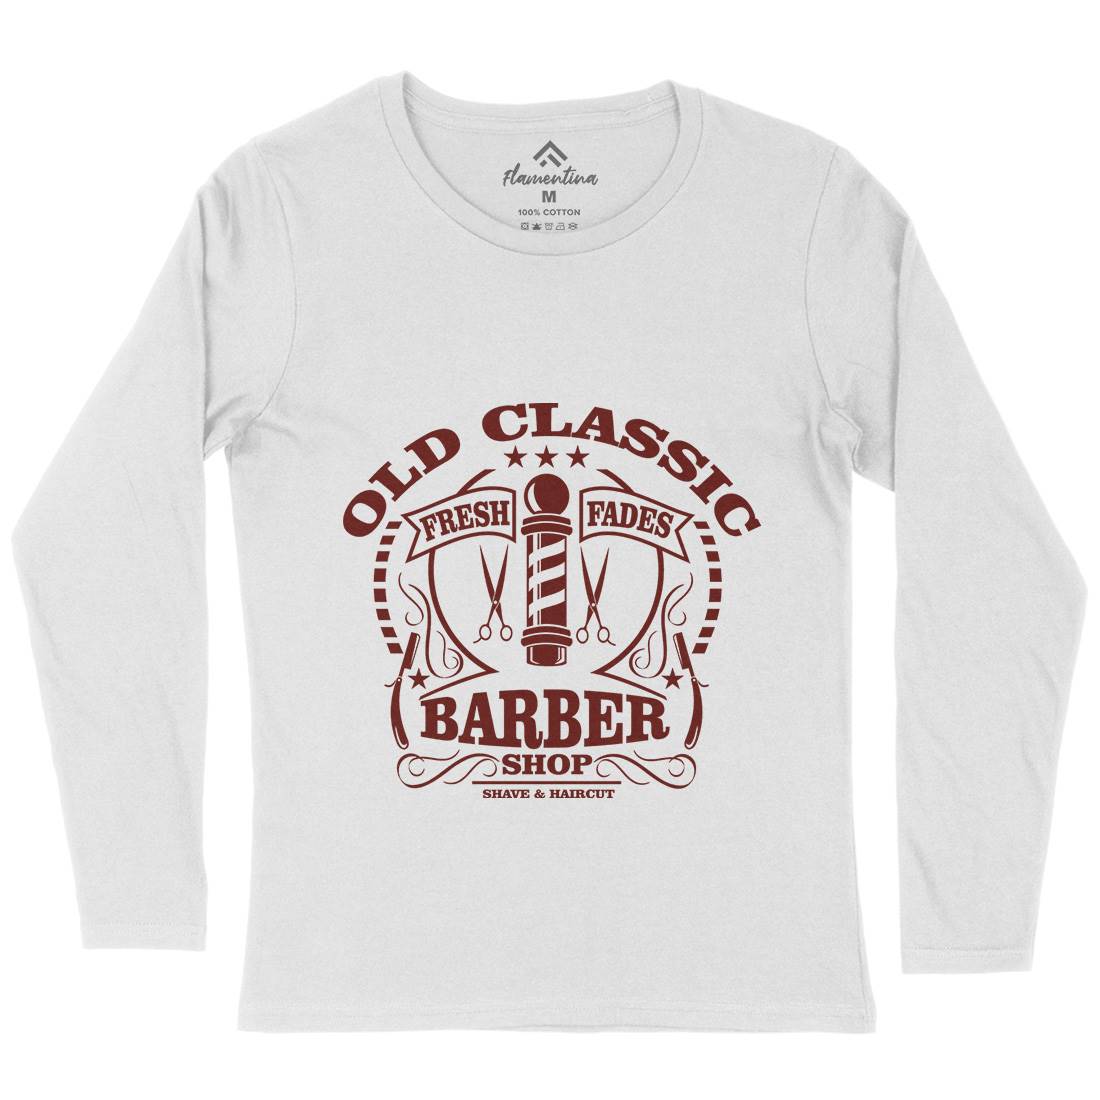 Old Classic Womens Long Sleeve T-Shirt Barber A099